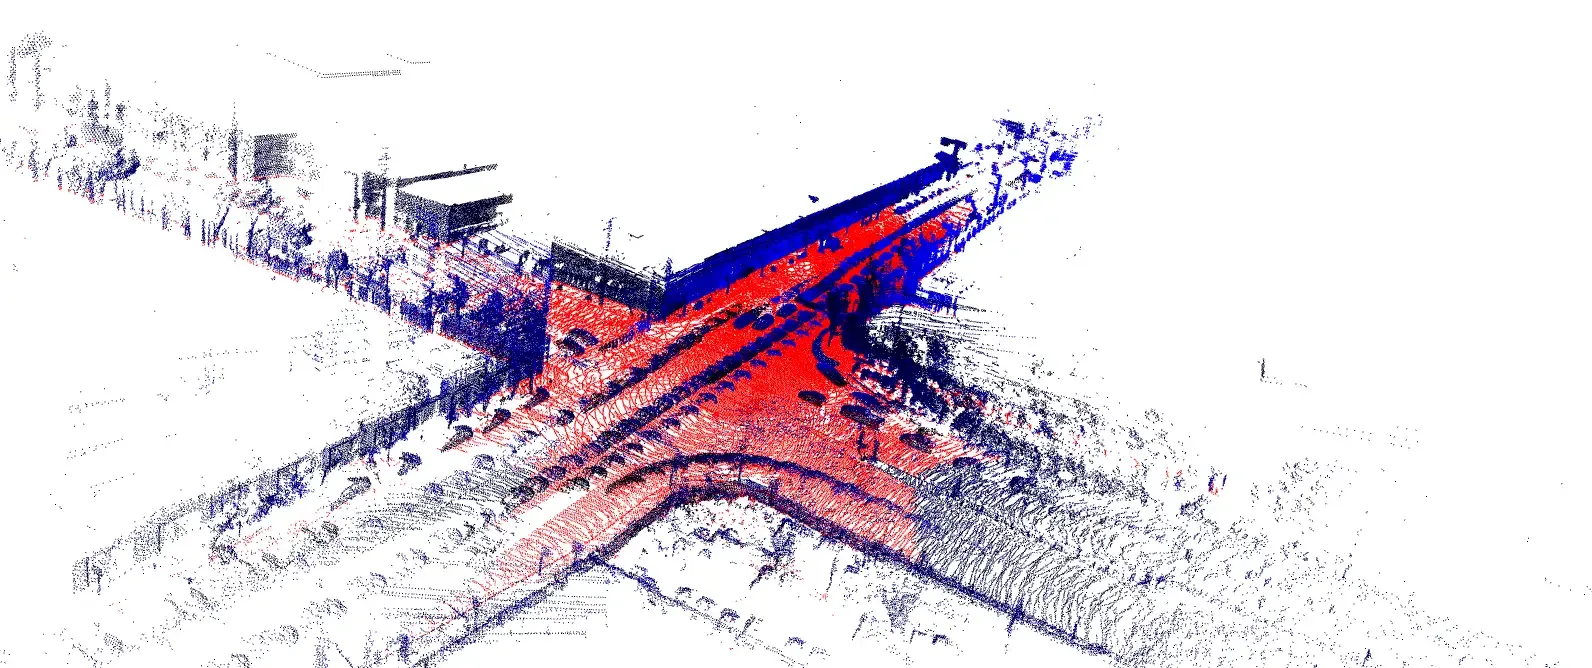 LiDAR point cloud of Brannan Street in San Francisco with road segmented in red